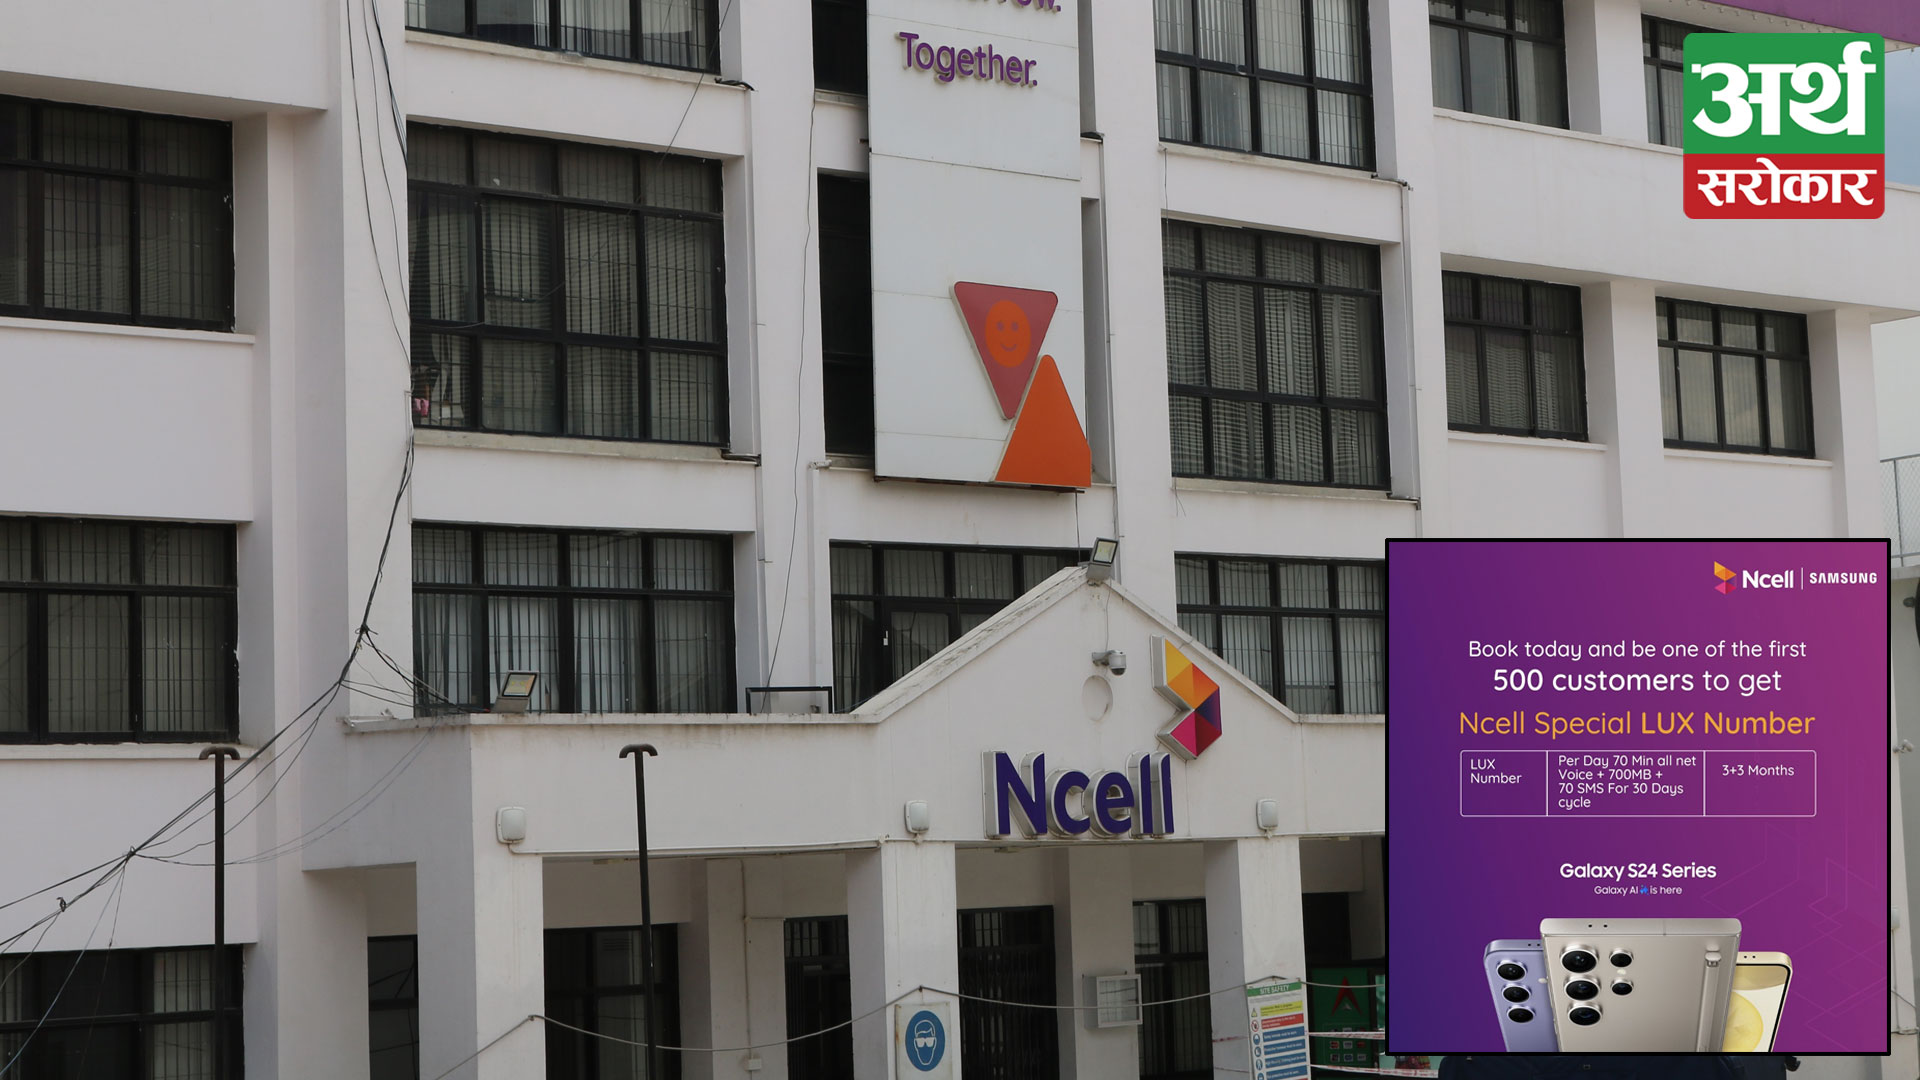 Ncell and Samsung introduce an attractive collaboration with the launch of the Galaxy S24 Series